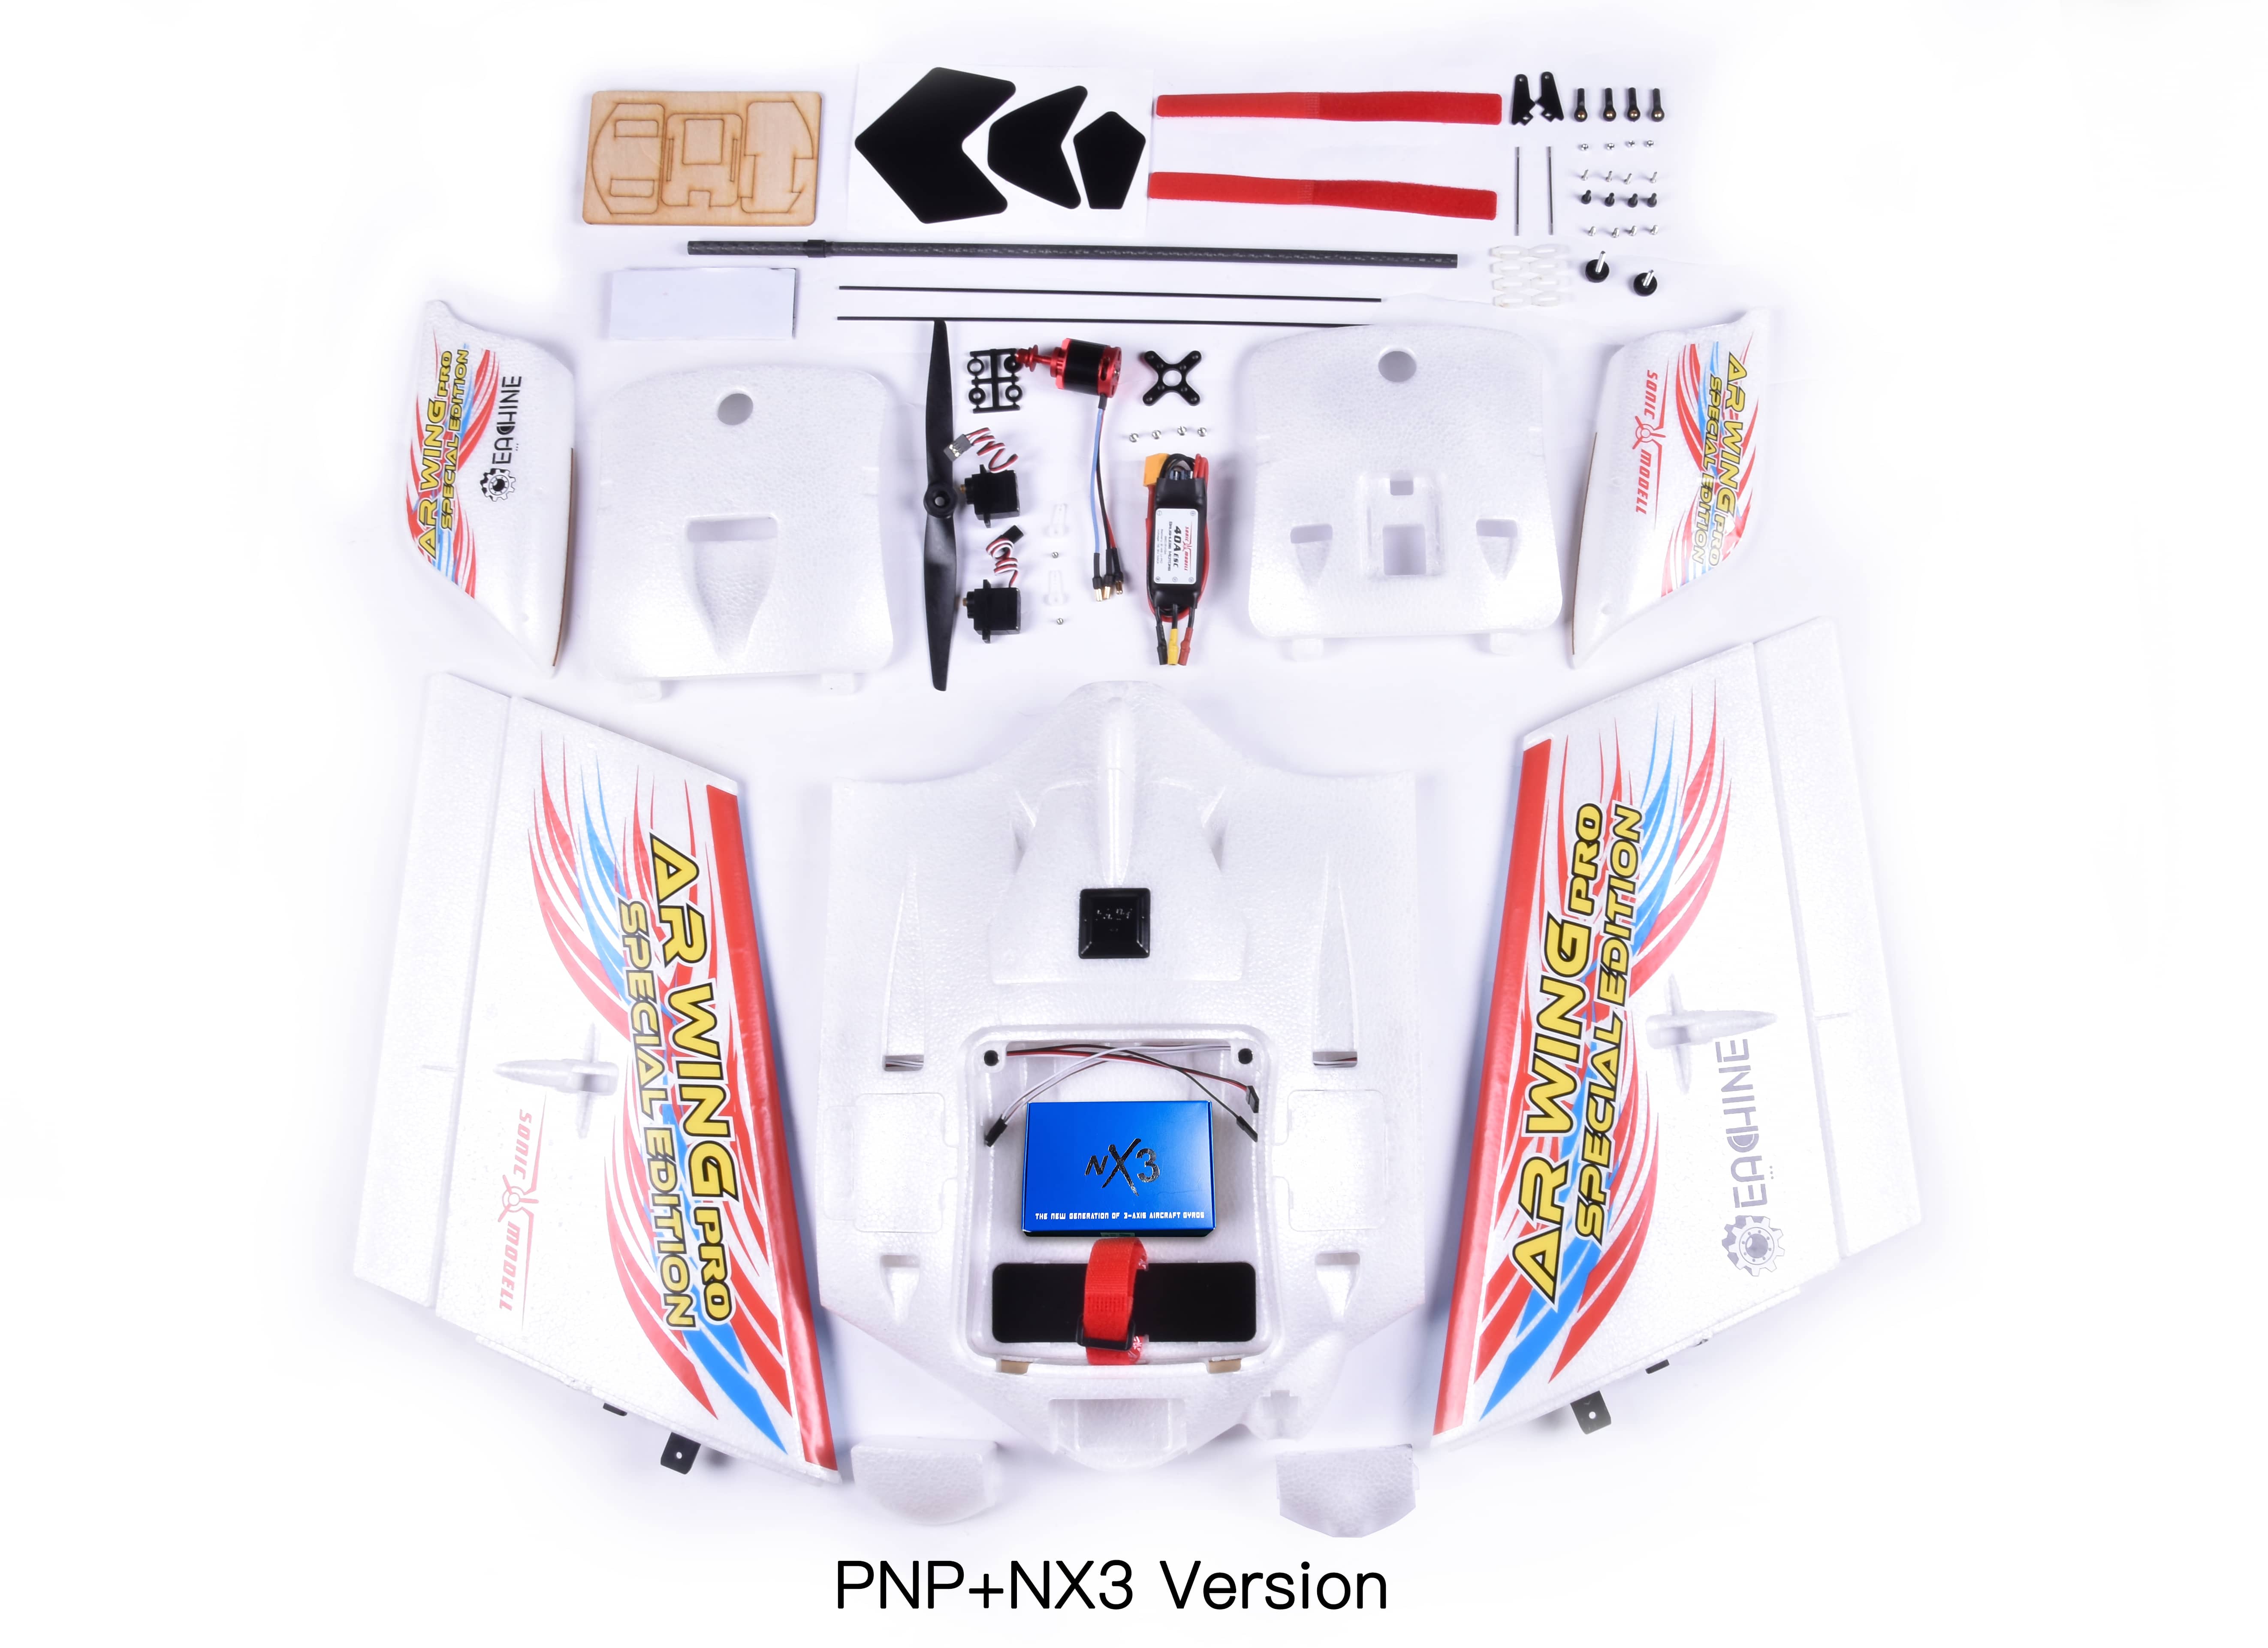 Eachine--Sonicmodell-AR-Wing-Pro-Special-Edition-1000mm-Wingspan-EPP-FPV-Flying-Wing-RC-Airplane-KIT-1857256-16